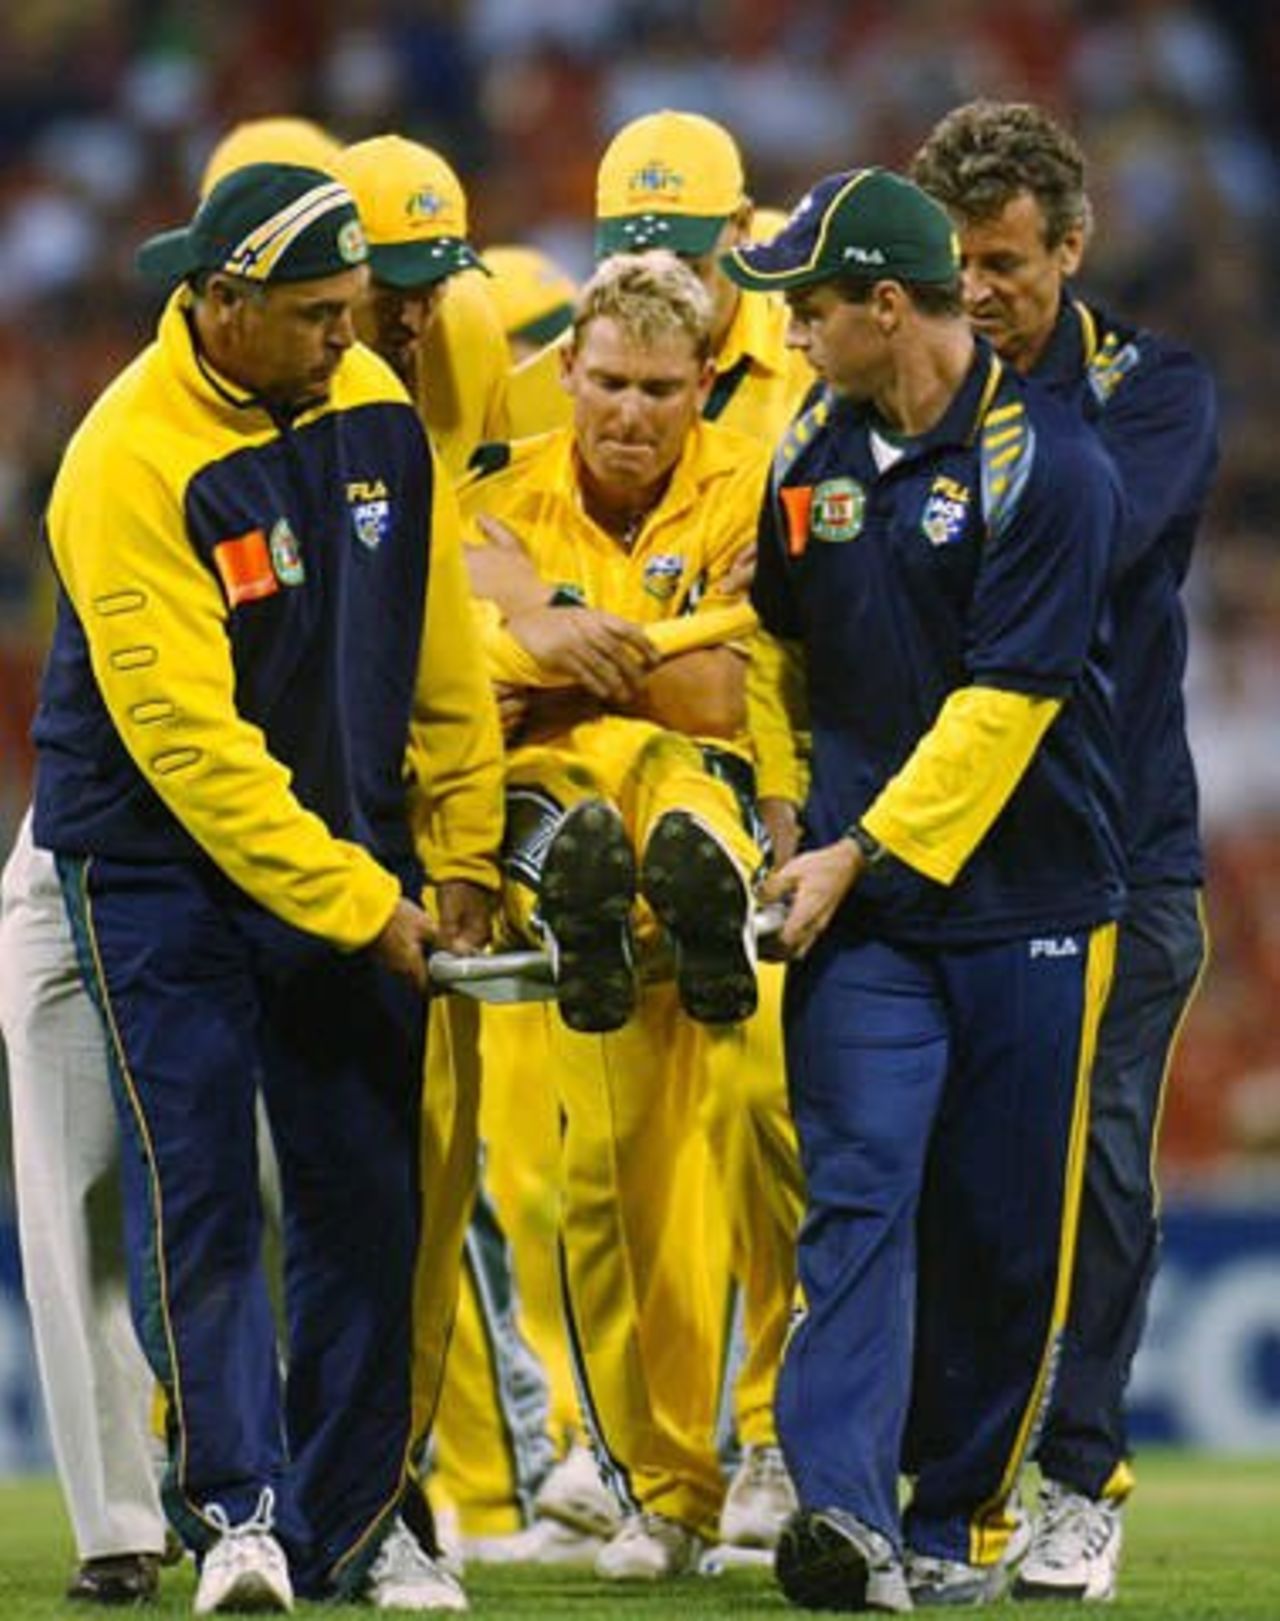 Shane Warne is carried off the field after injuring his shoulder attempting a full-length dive to field the ball during Australia's VB series match with England, Melbourne, 15 Dec 2002